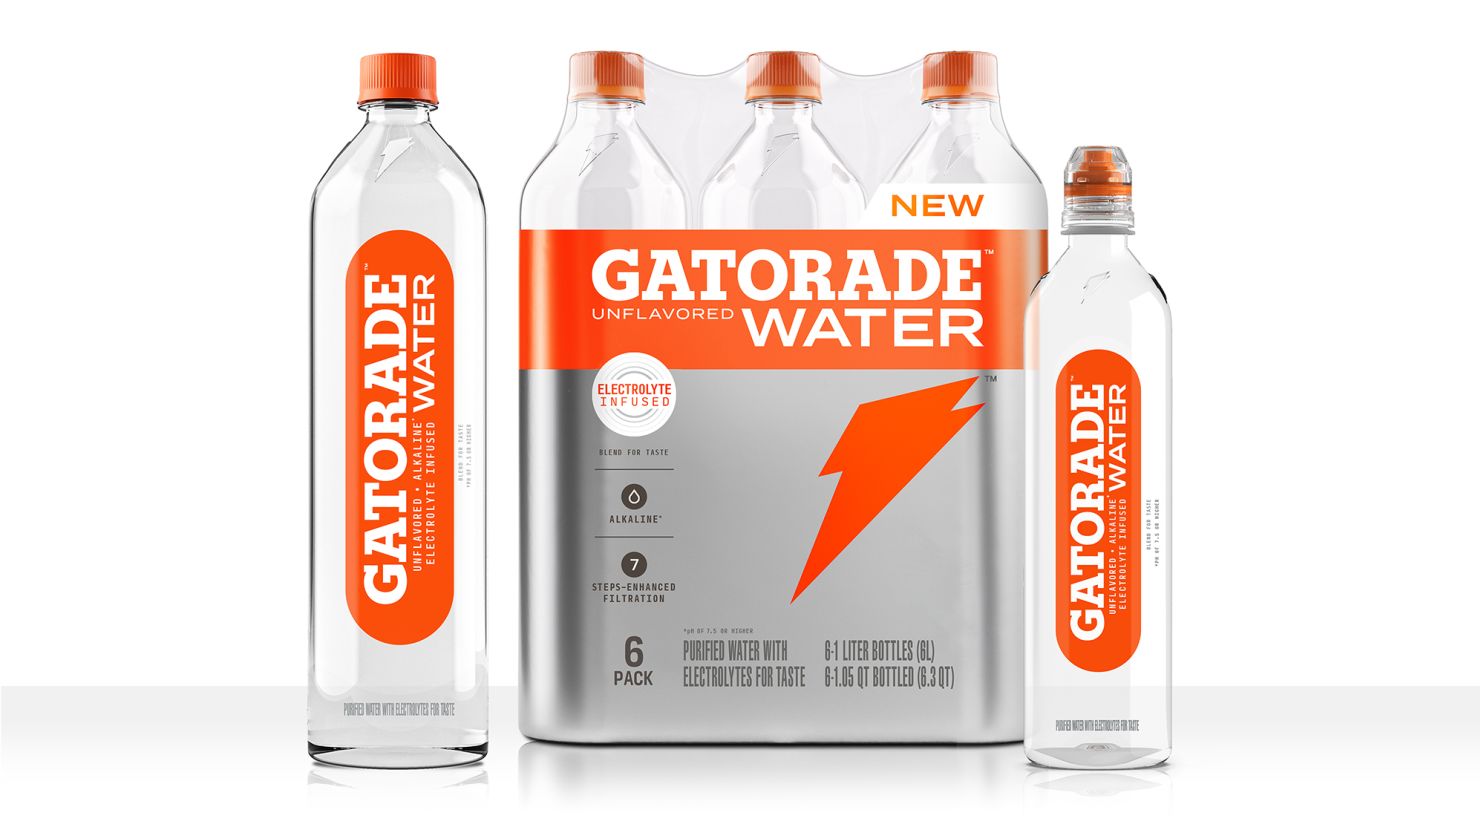 Gatorade is getting into the water business.